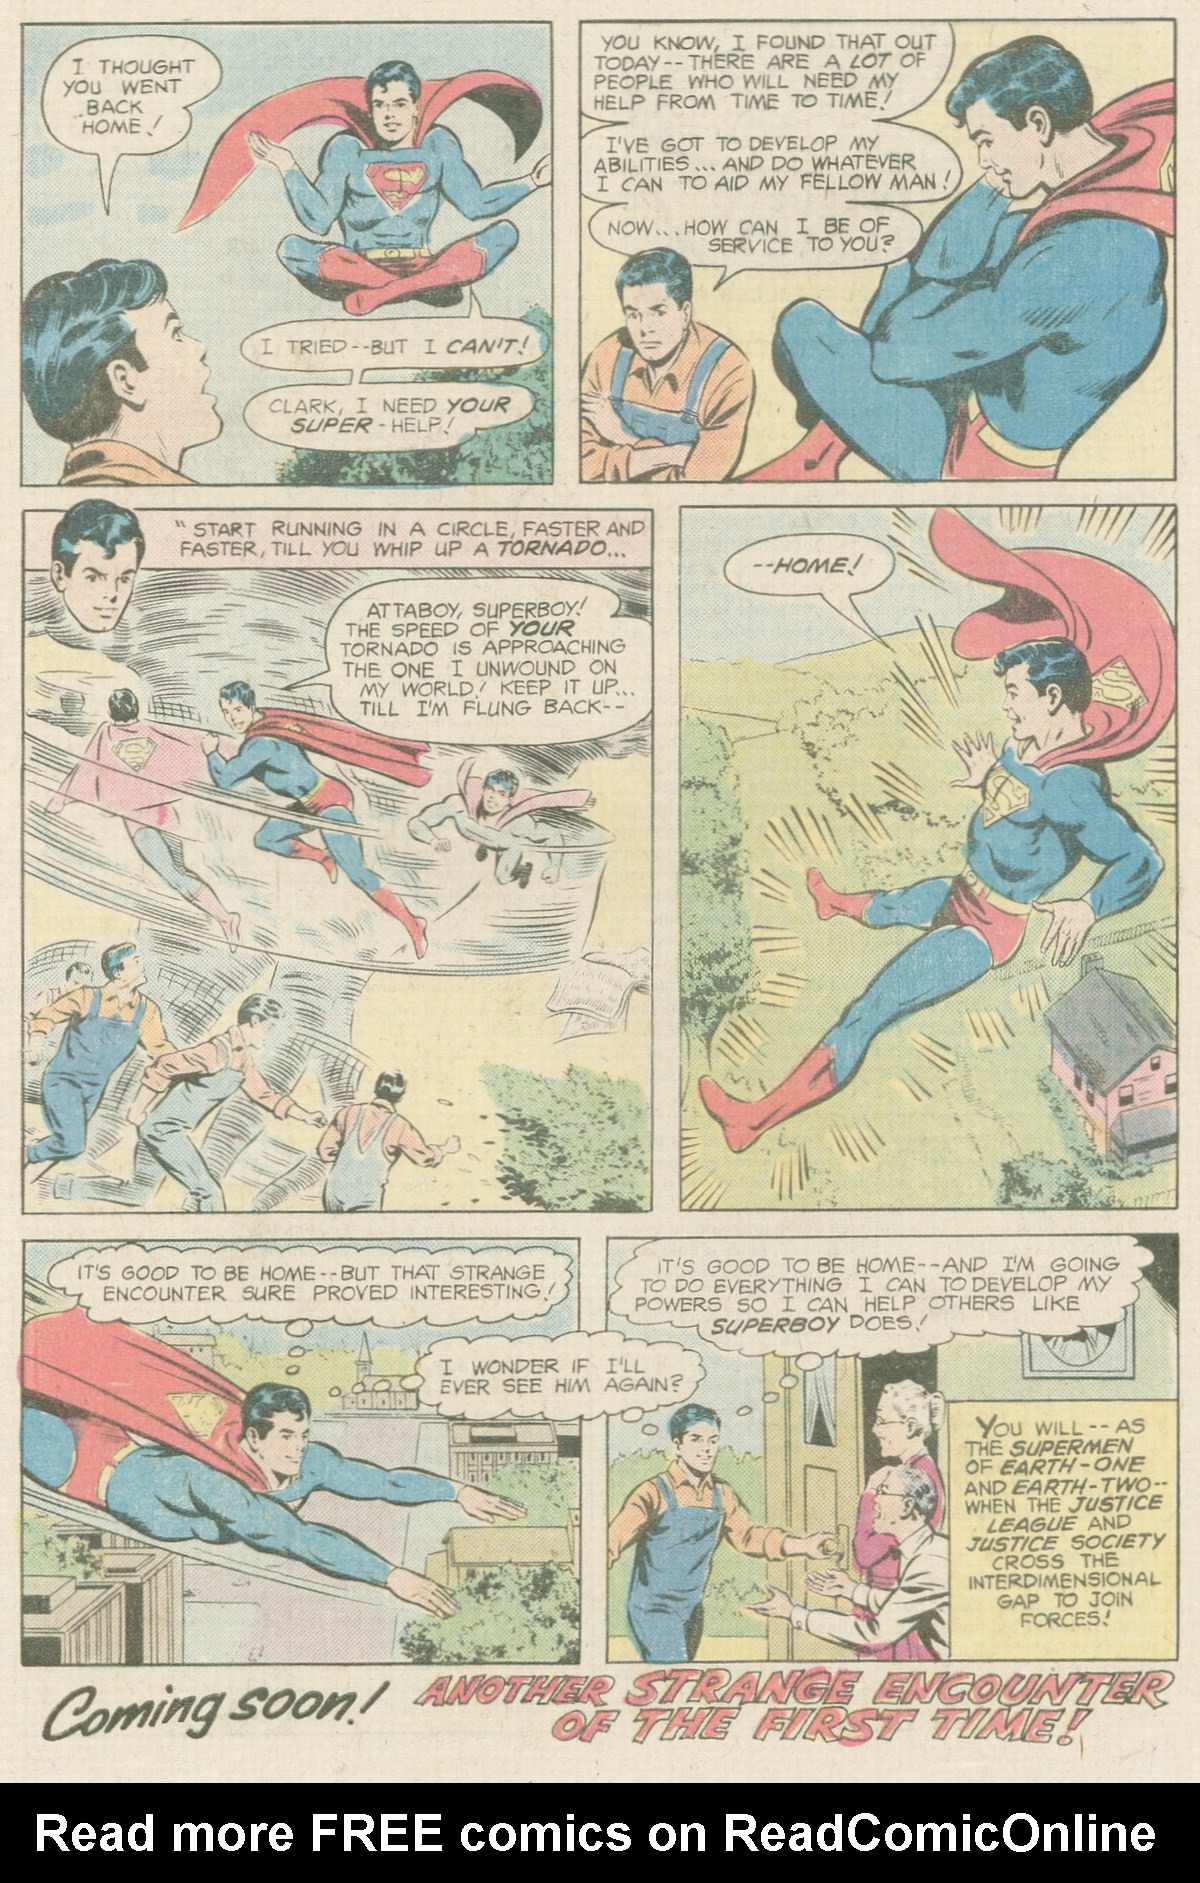 The New Adventures of Superboy 16 Page 25